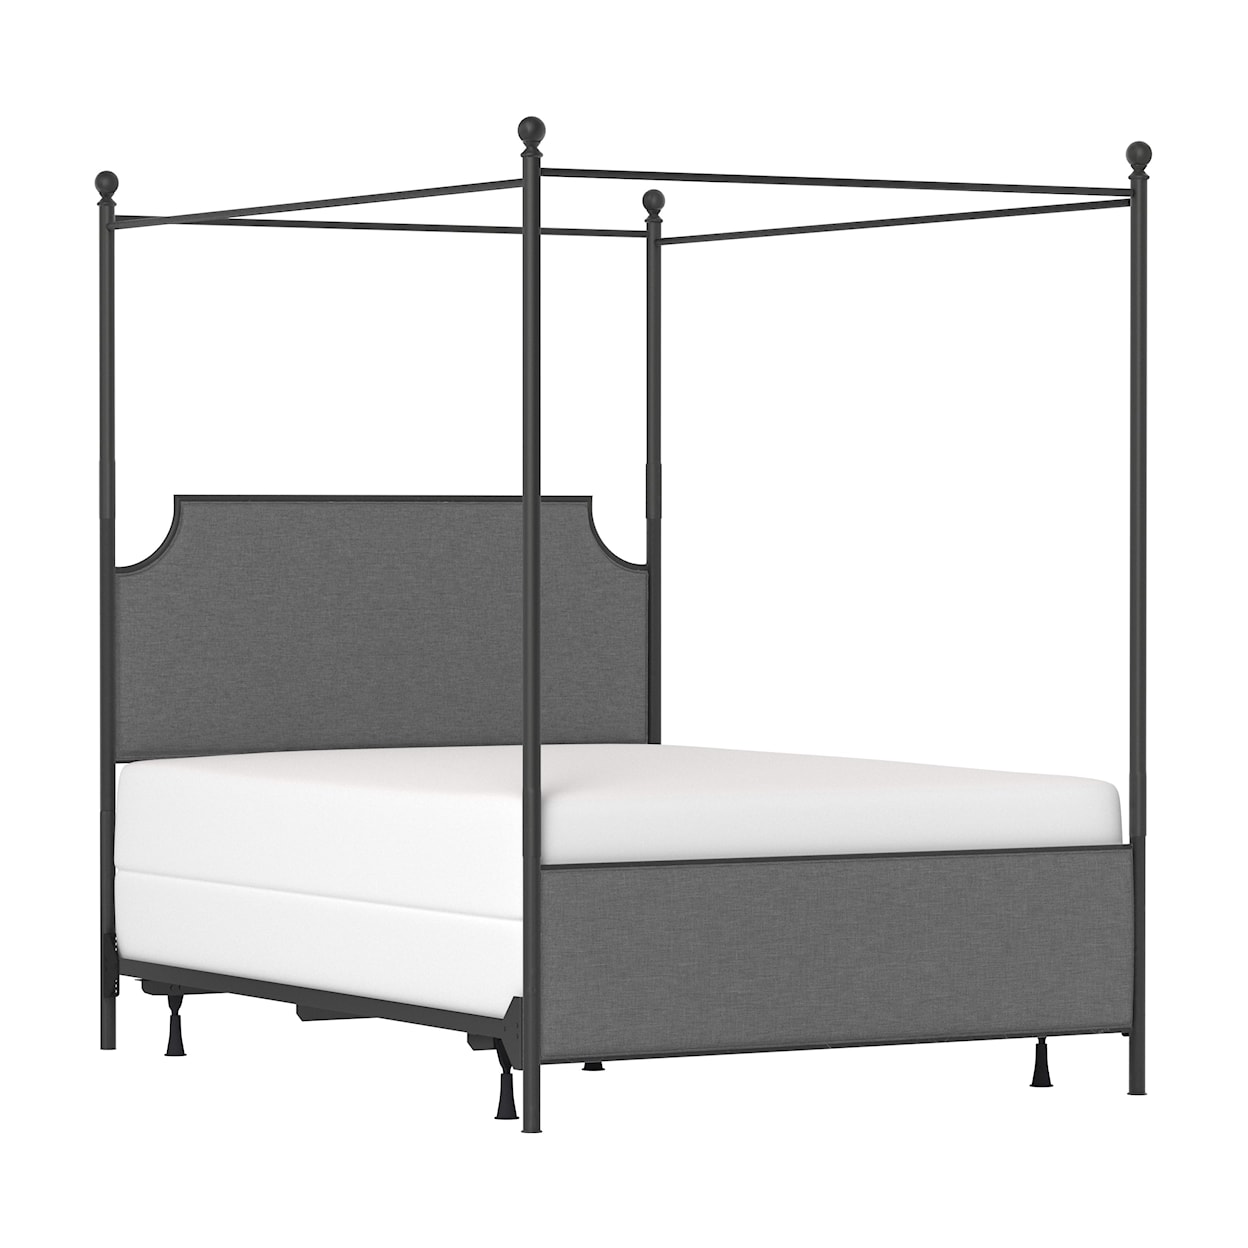 Hillsdale McArthur Queen Canopy Bed